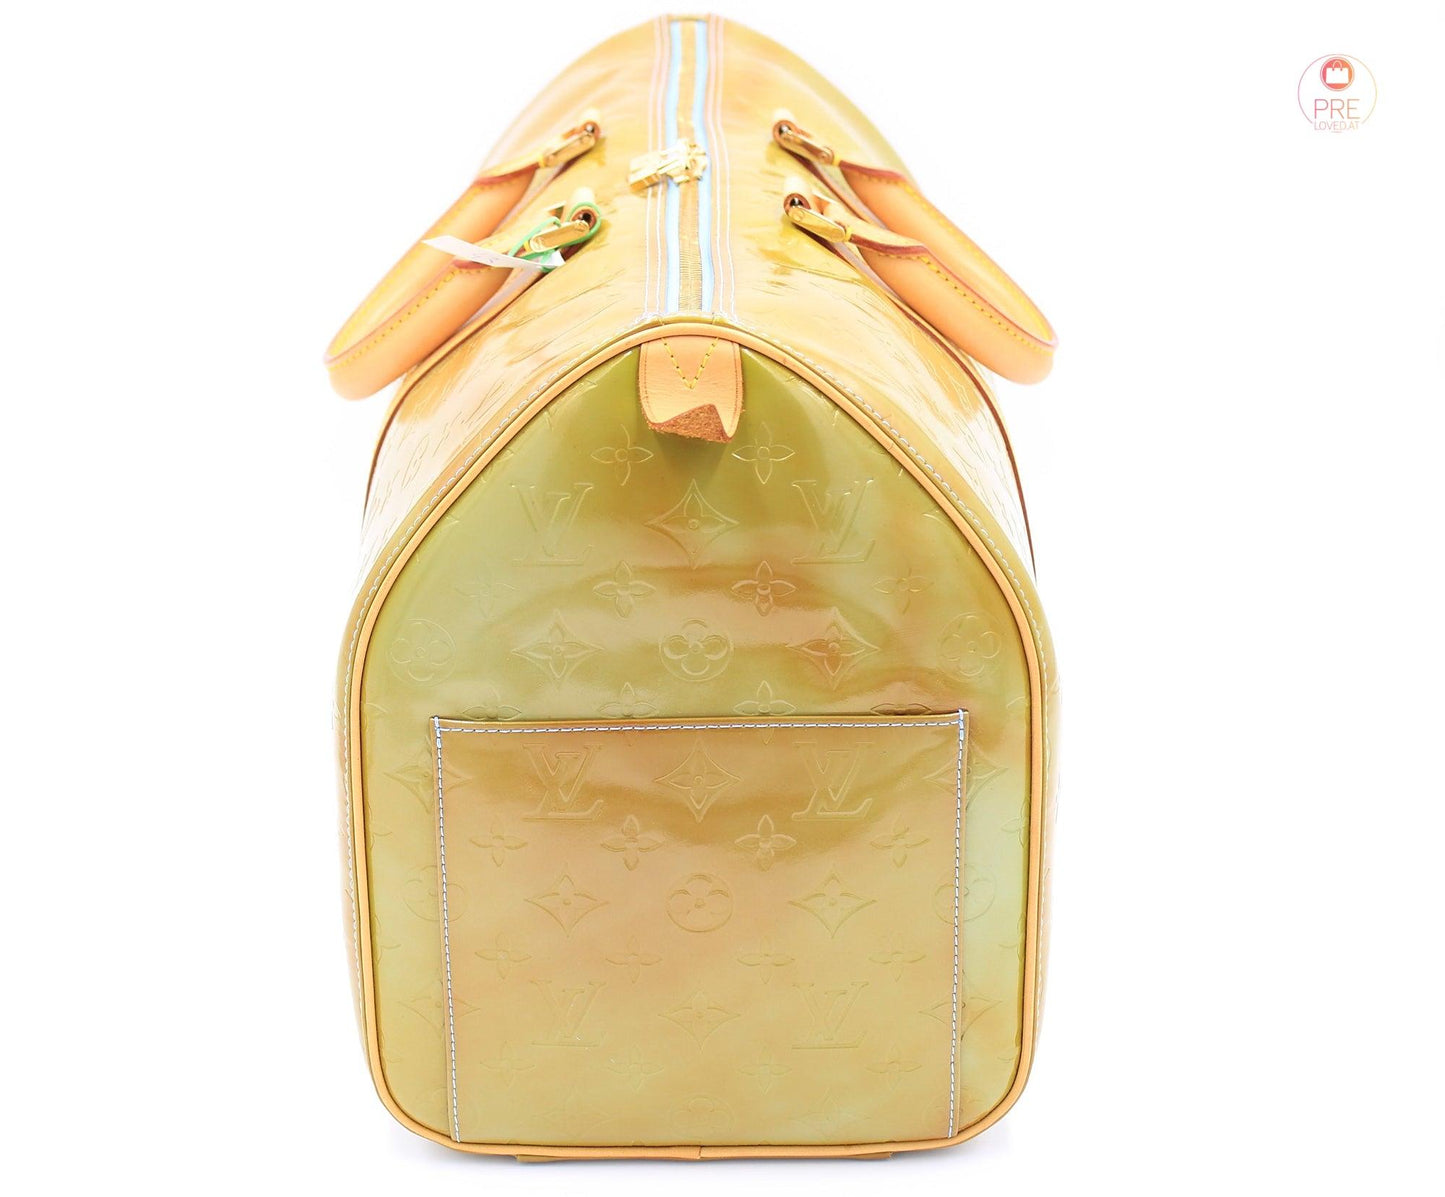 Louis Vuitton Citrine Monogram Vernis Keepall 45 Gold Hardware Available  For Immediate Sale At Sotheby's